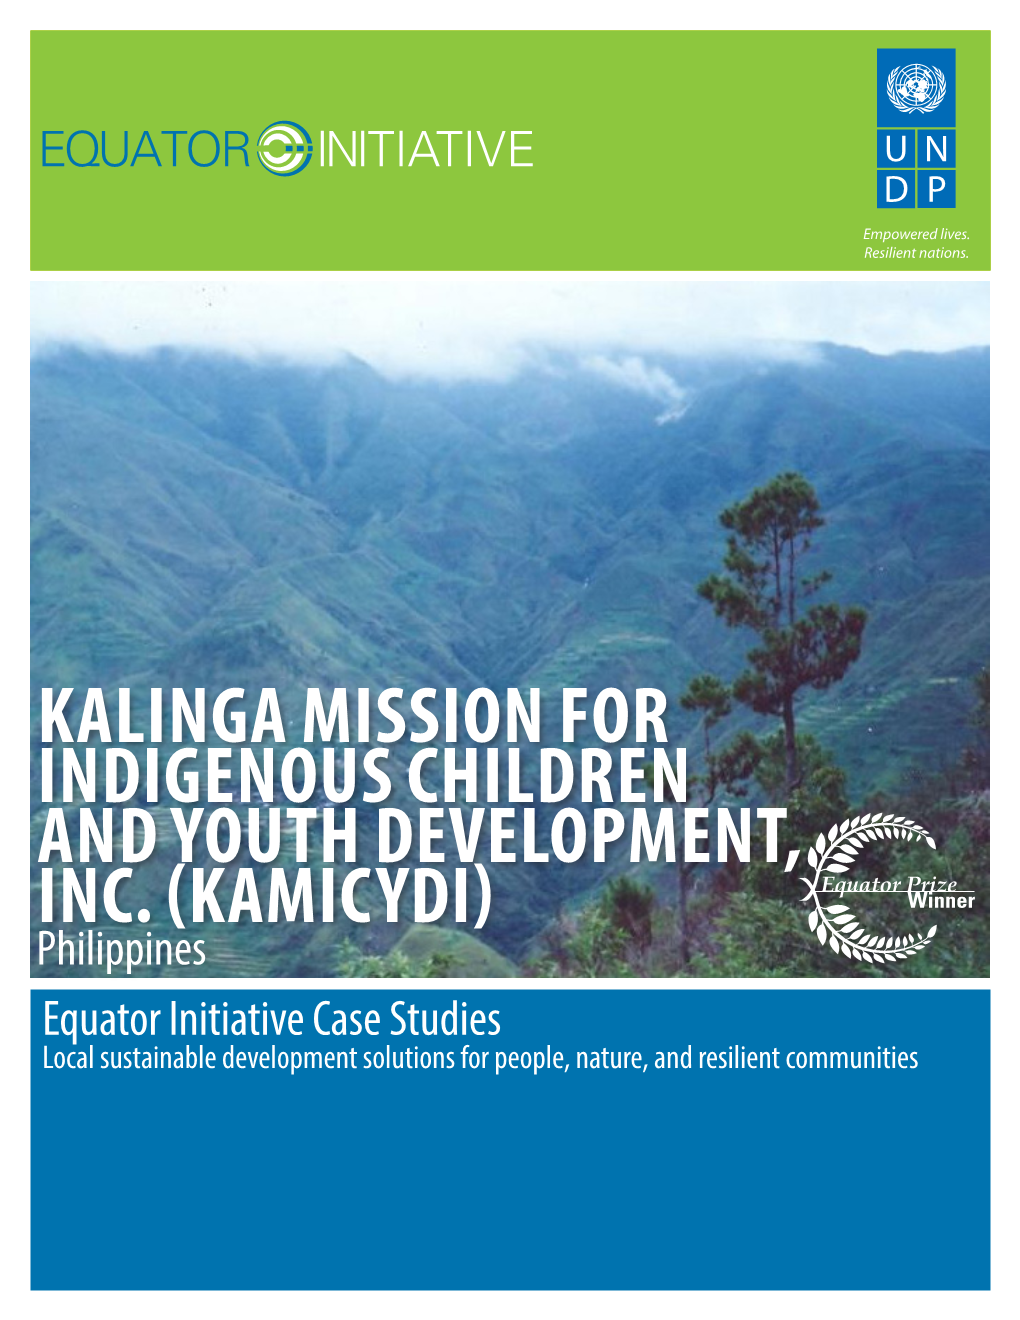 Kalinga Mission for Indigenous Children and Youth Development, Inc